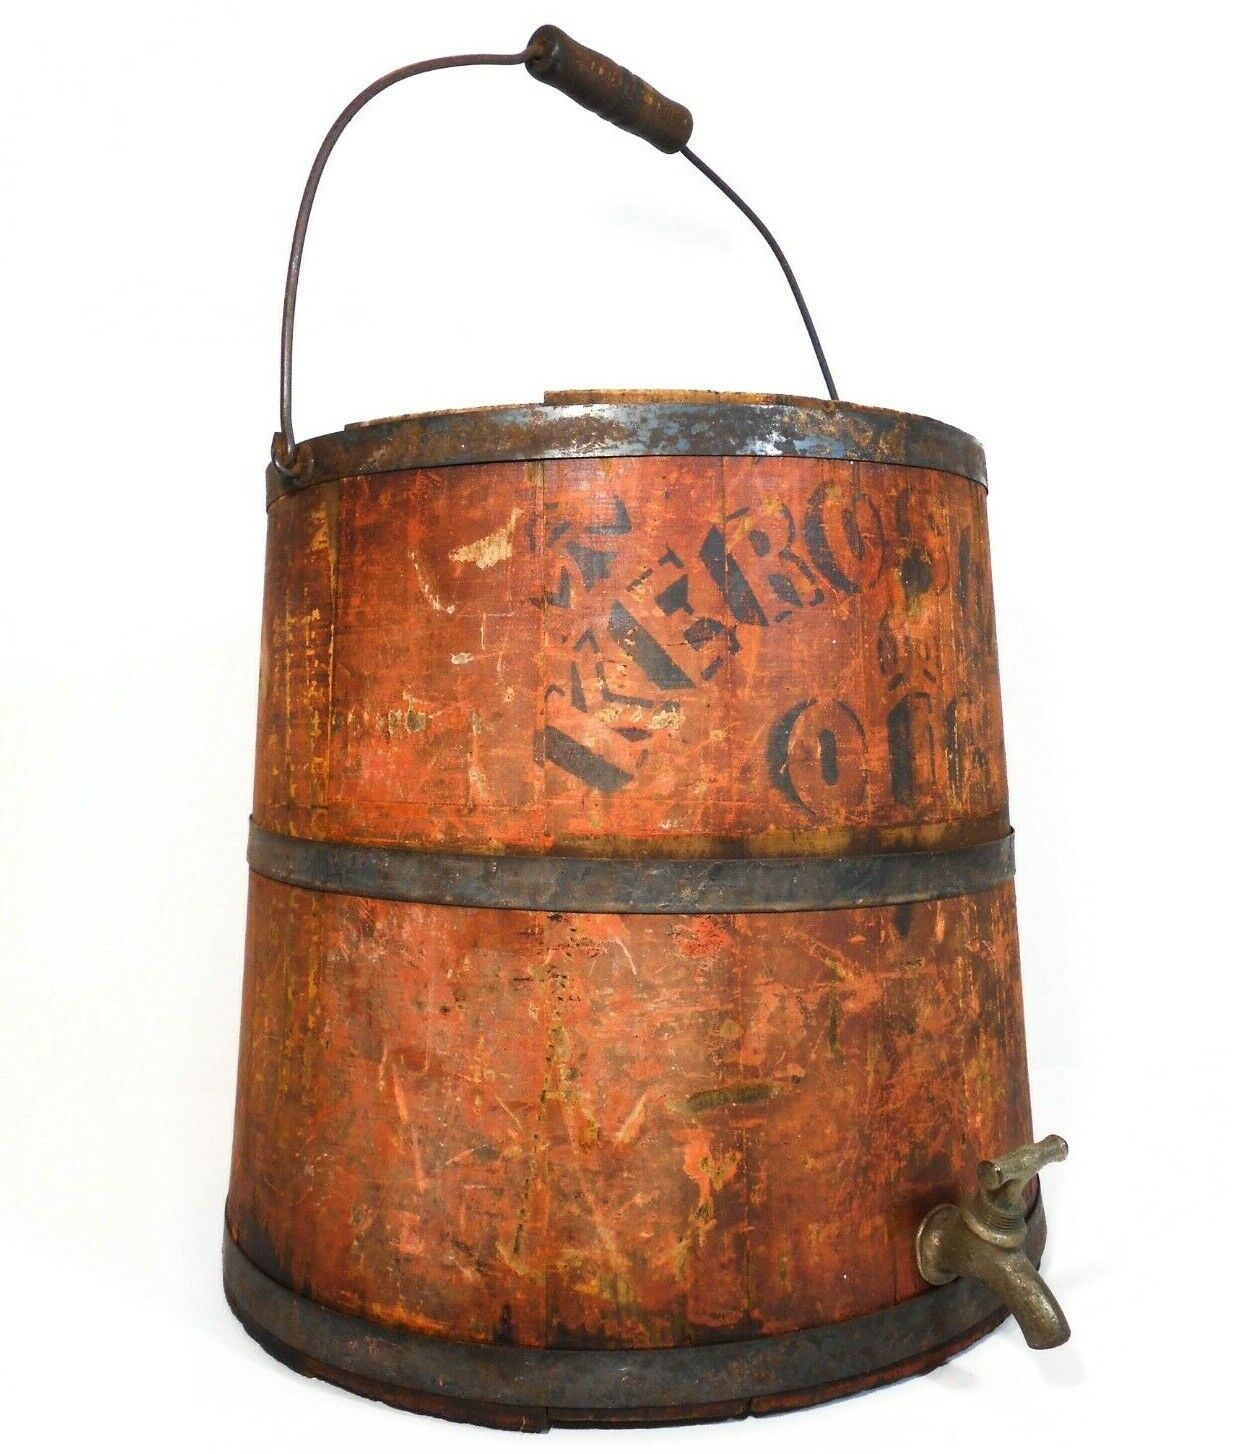 MID-LATE 19TH C RED PNTD/STENCILED STAVED WOOD KEROSENE OIL BUCKET W/WIRE HANDLE